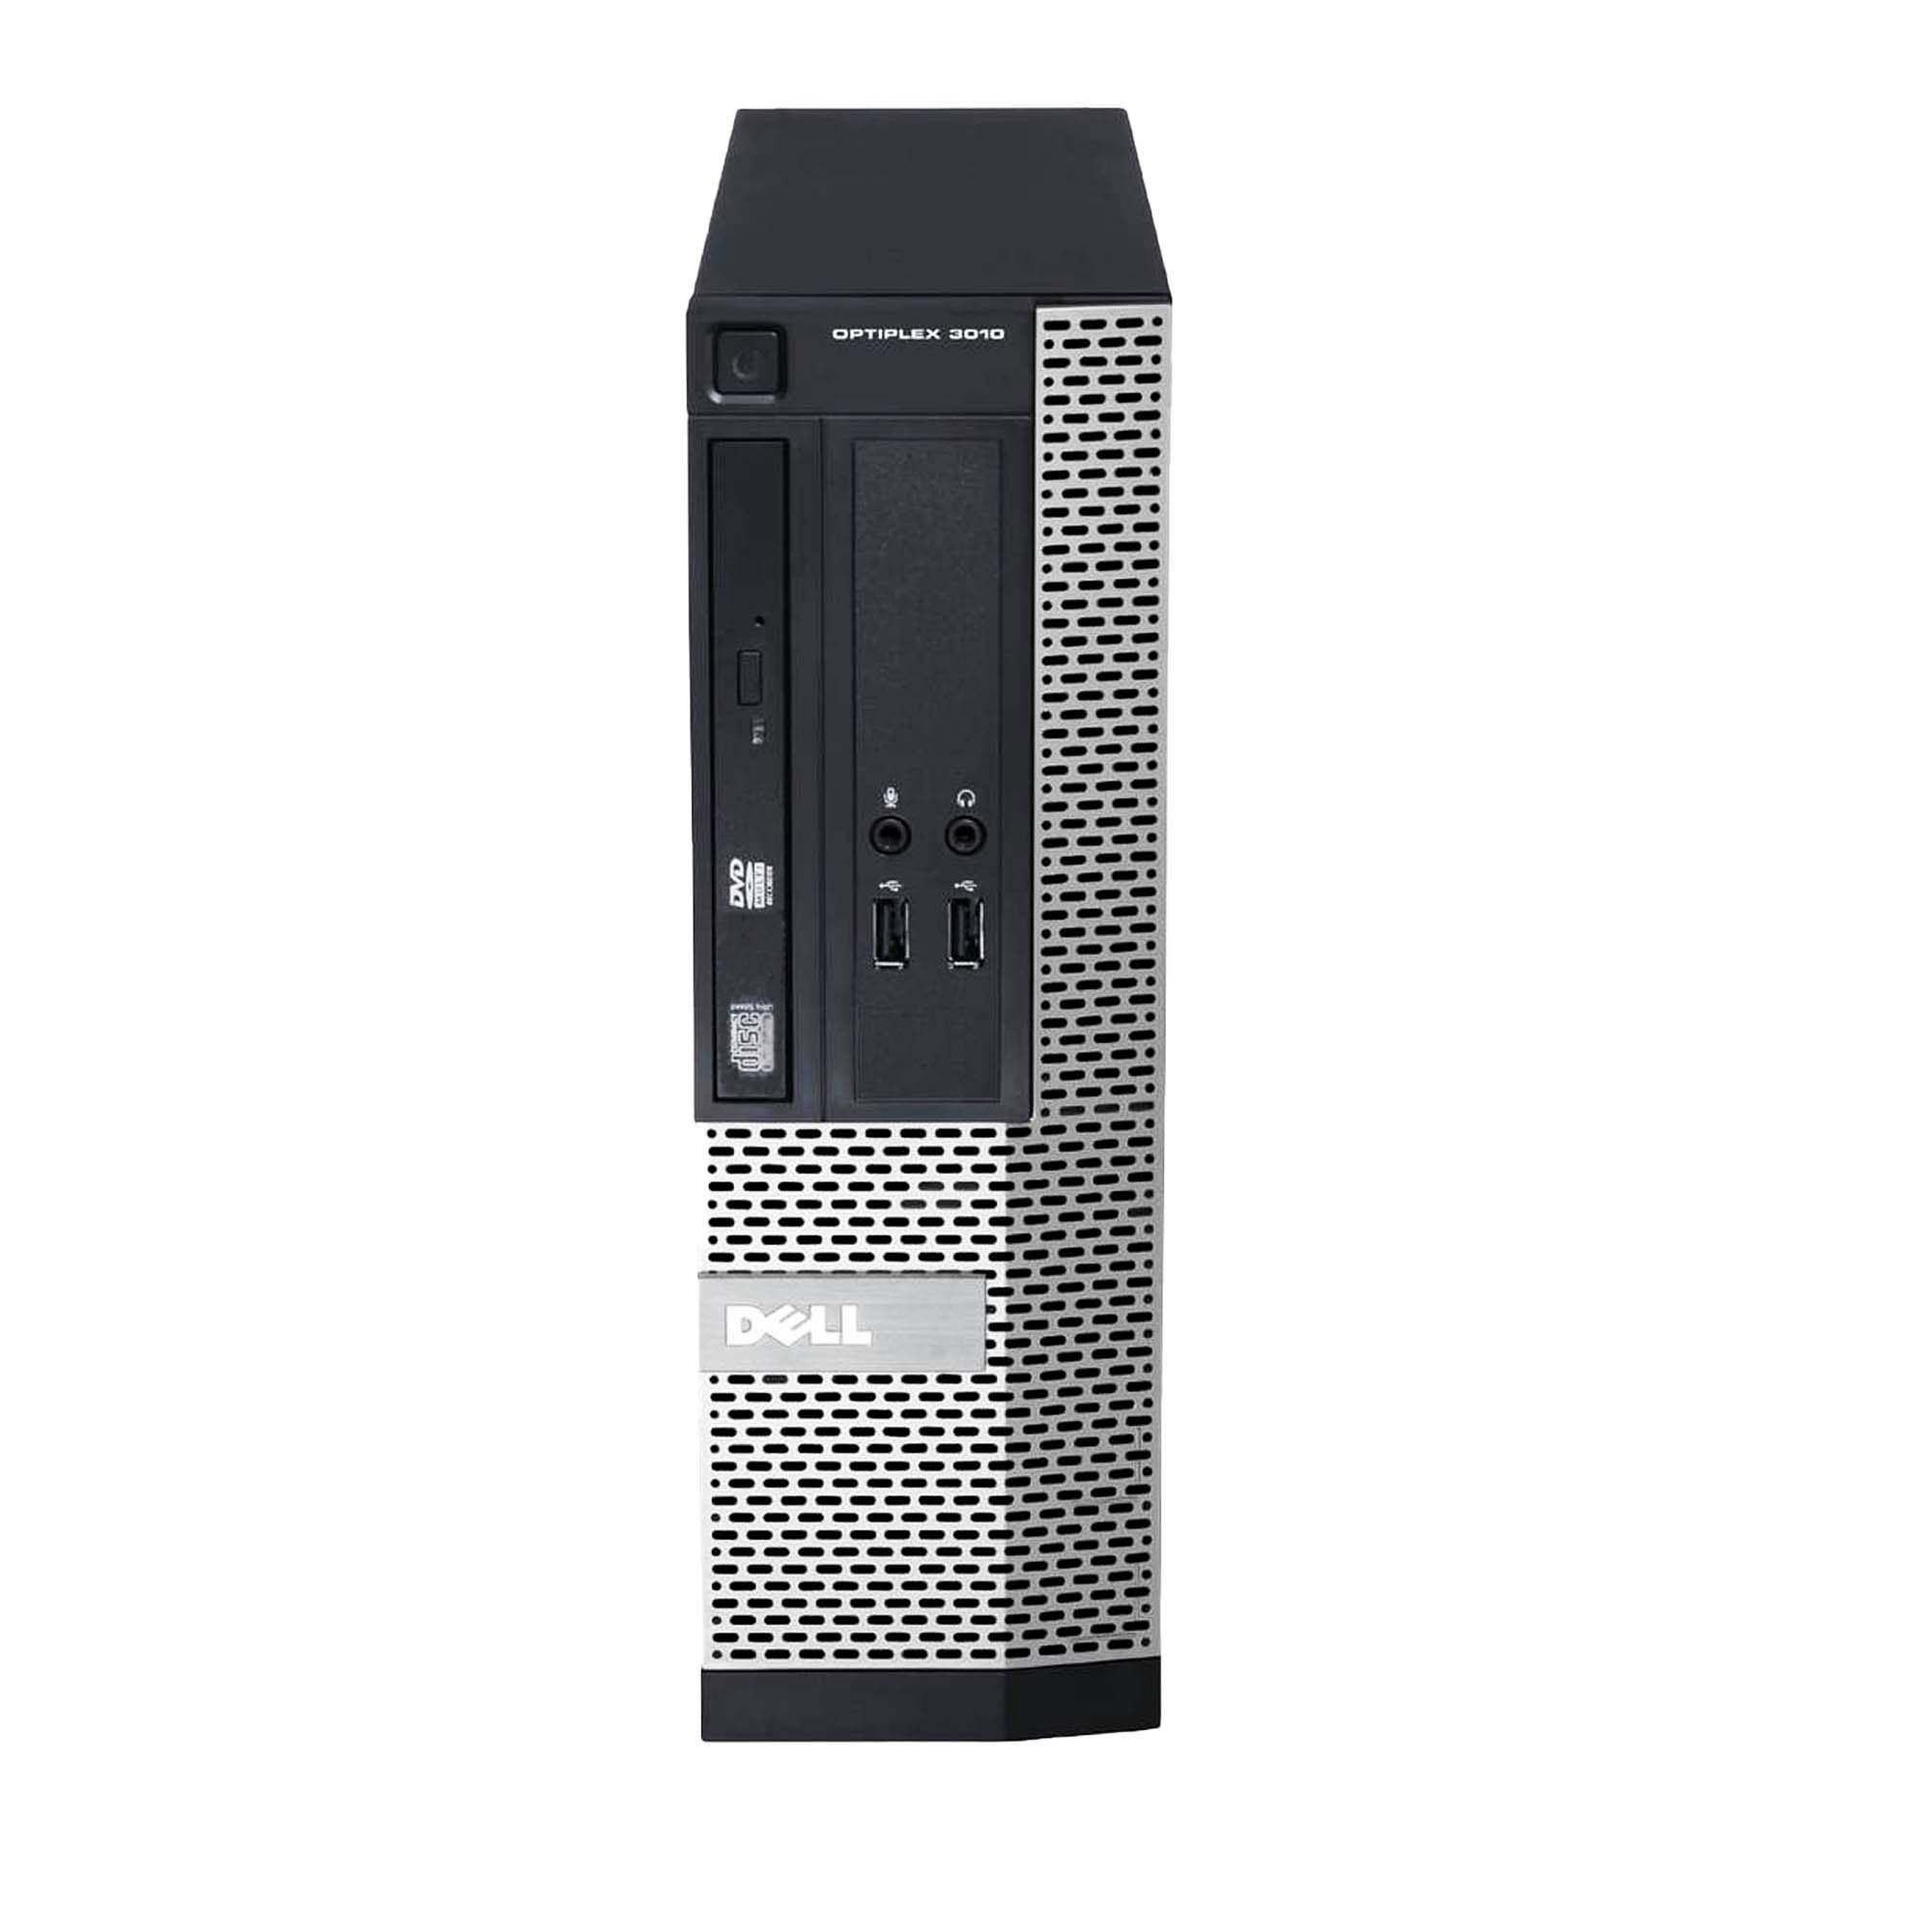 Dell Optiplex 3010 Desktop Computer Intel Core i5 3470 8GB RAM 500GB SSD Windows 10 Home PC, New Free keyboard and Mouse, WiFi Adapter, Black - image 4 of 6